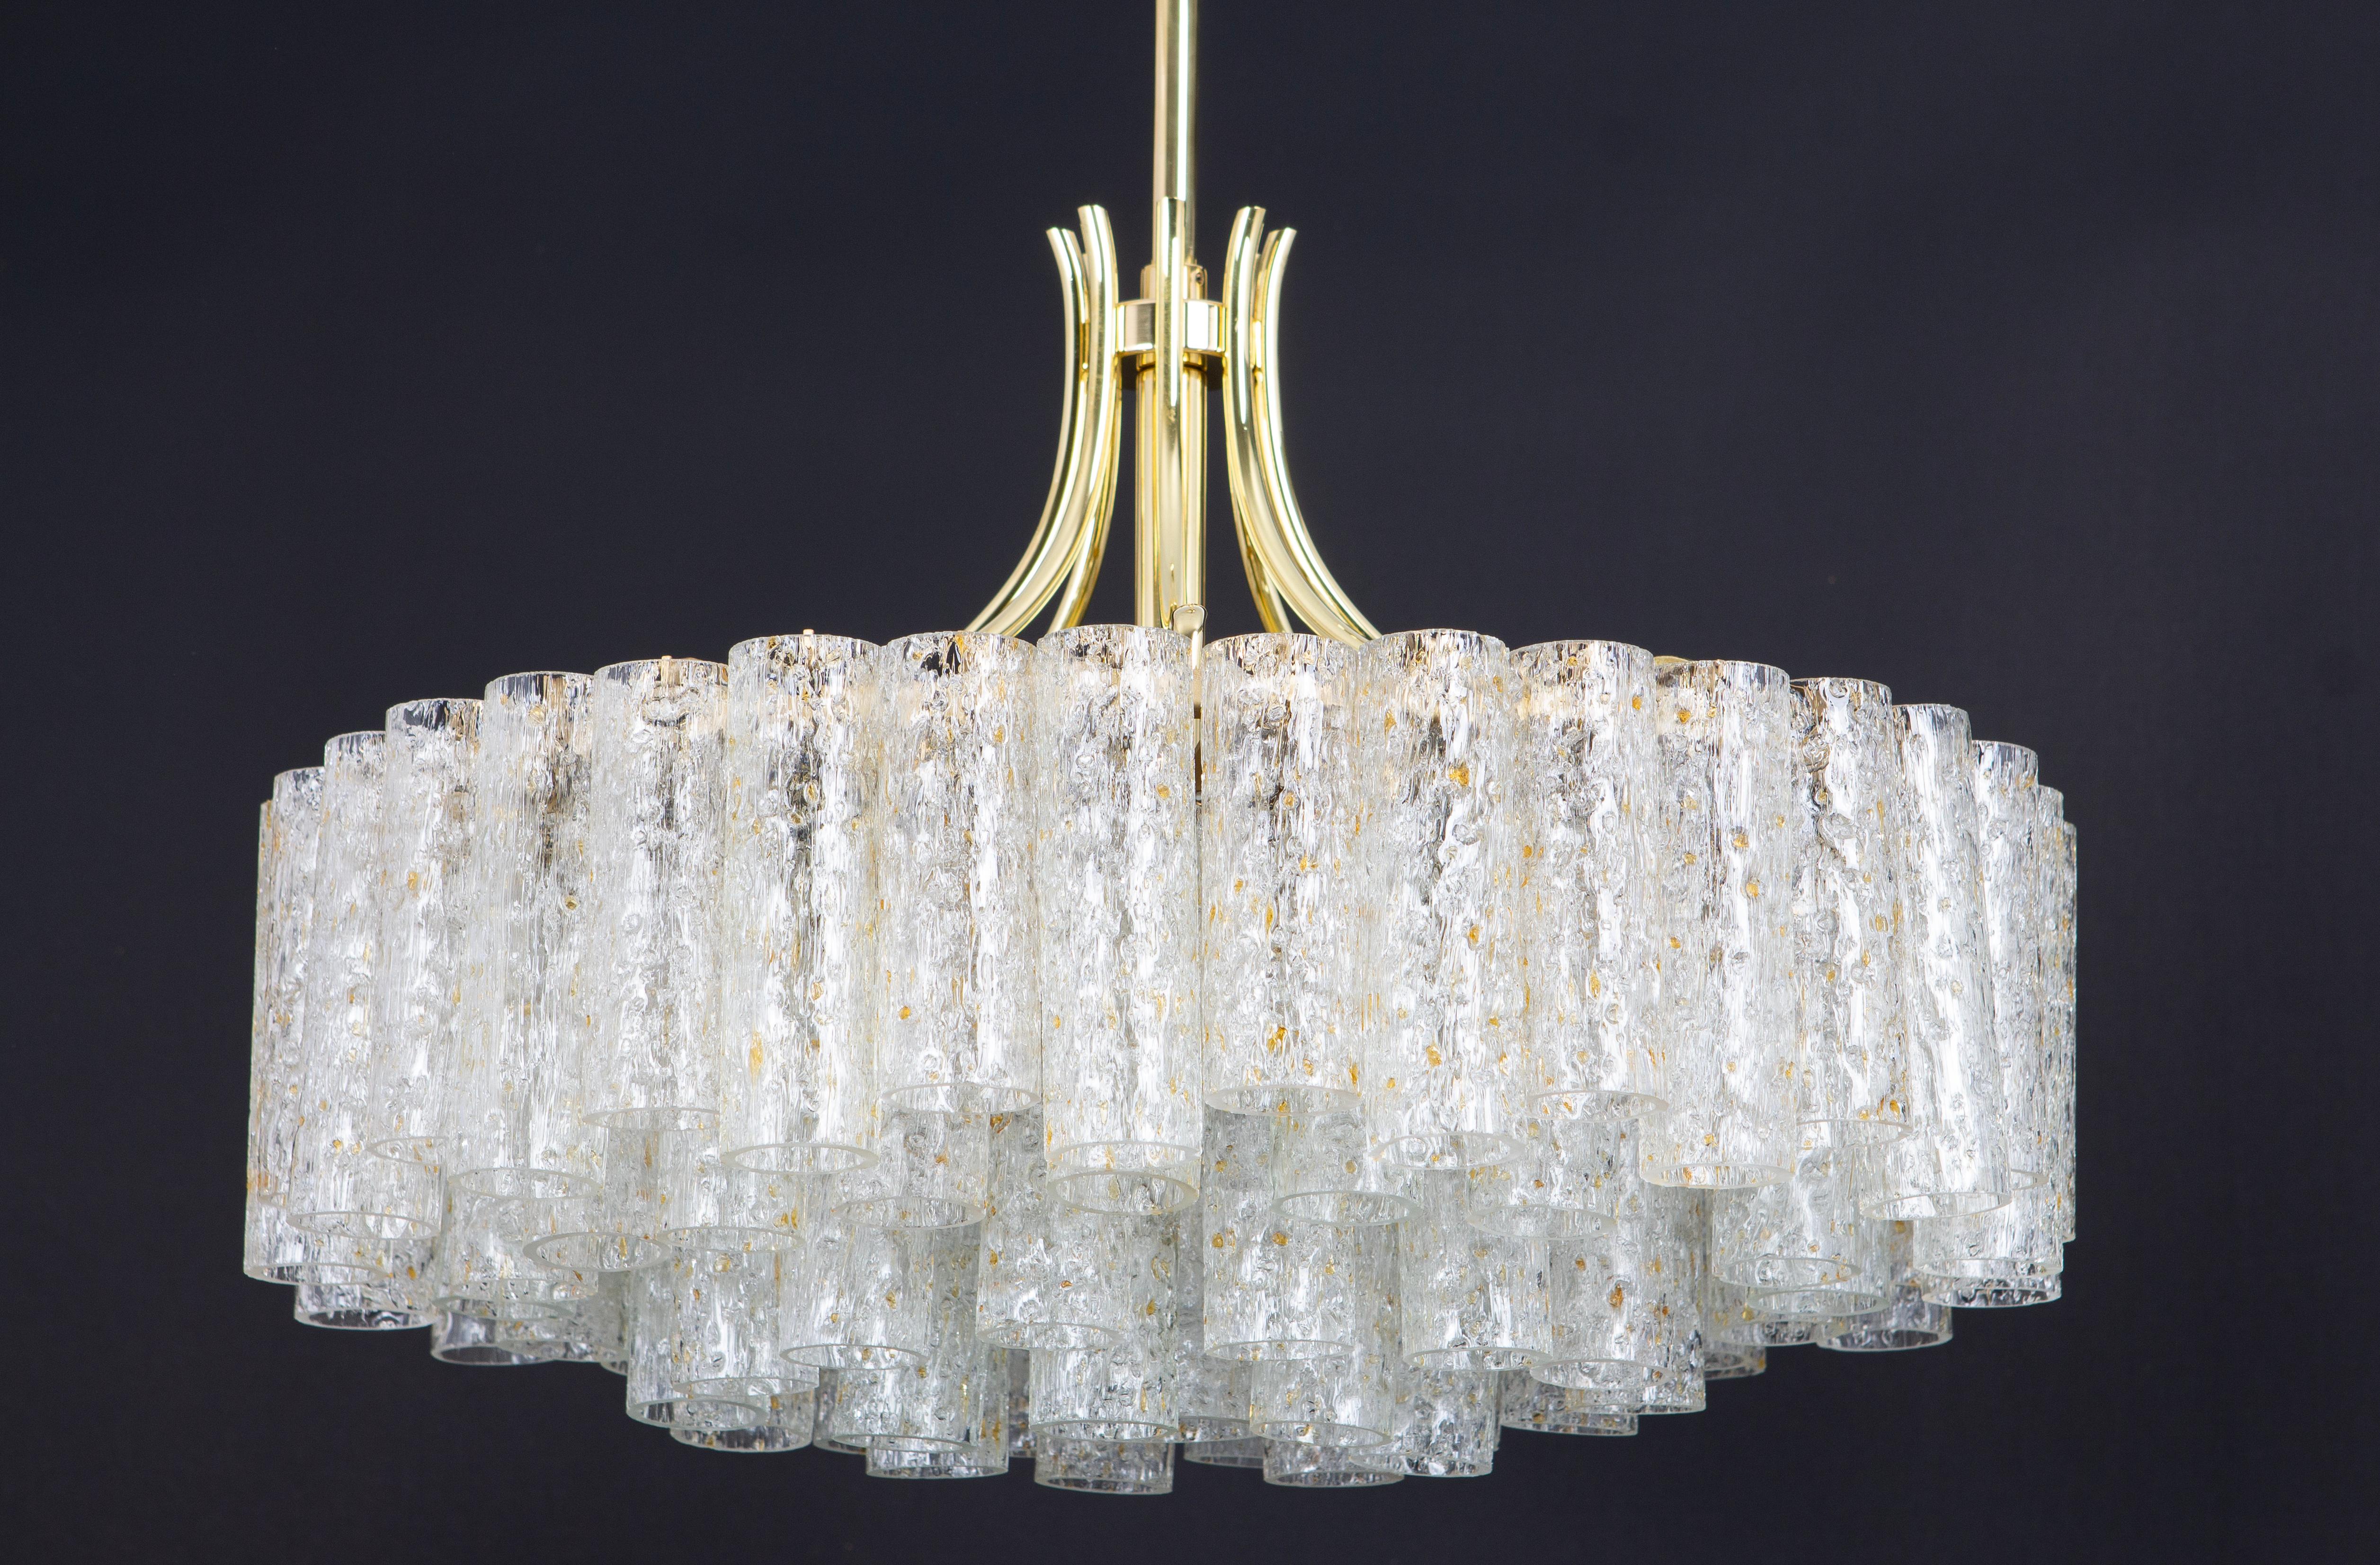 1 of 2 Stunning Large Doria Ice Glass Tubes Chandelier, Germany, 1960s For Sale 4